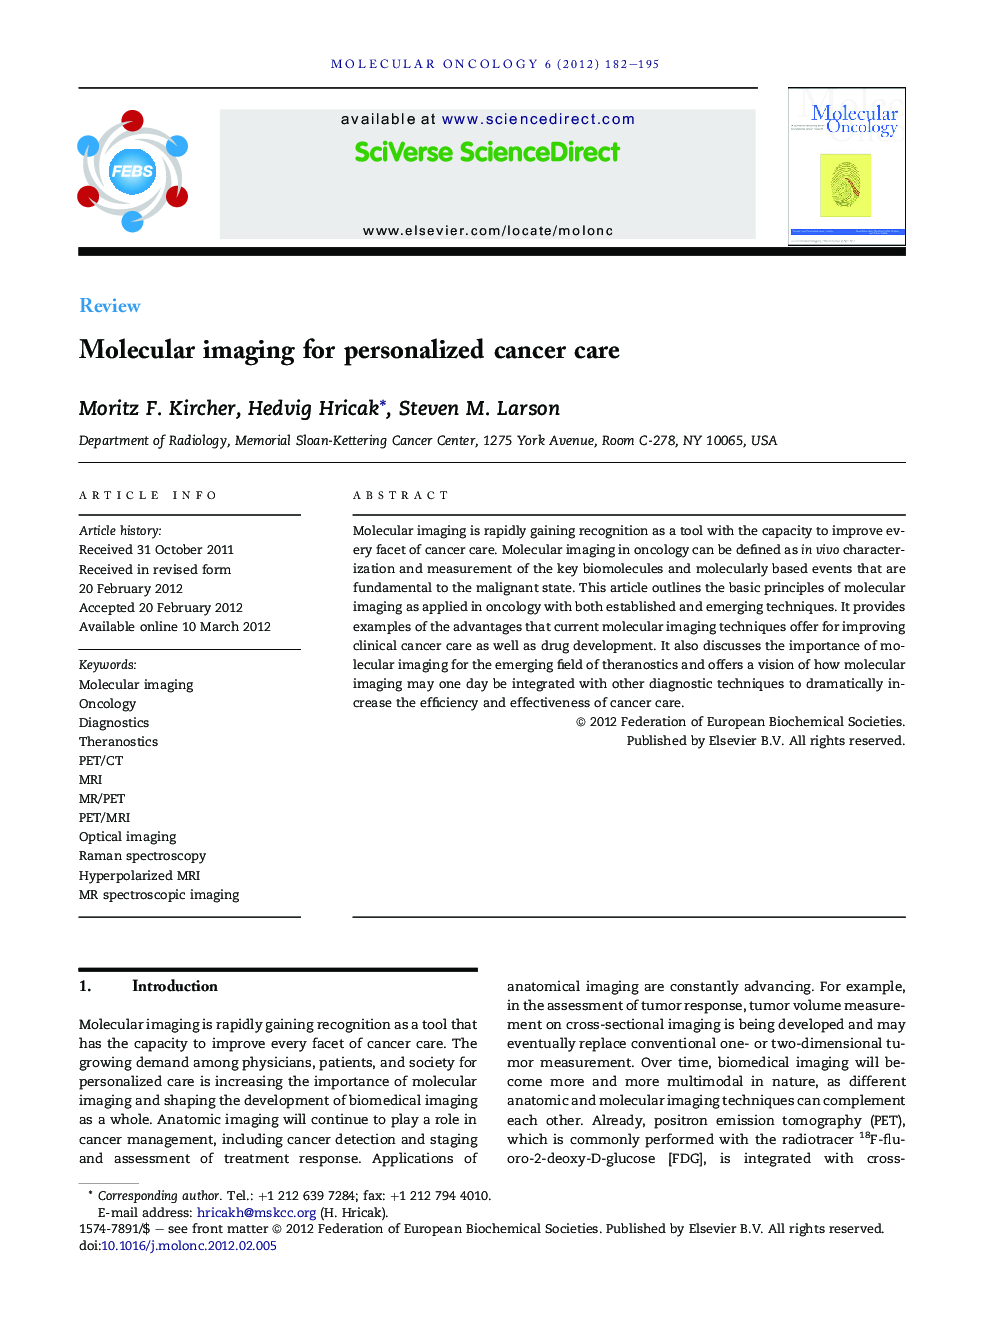 Molecular imaging for personalized cancer care